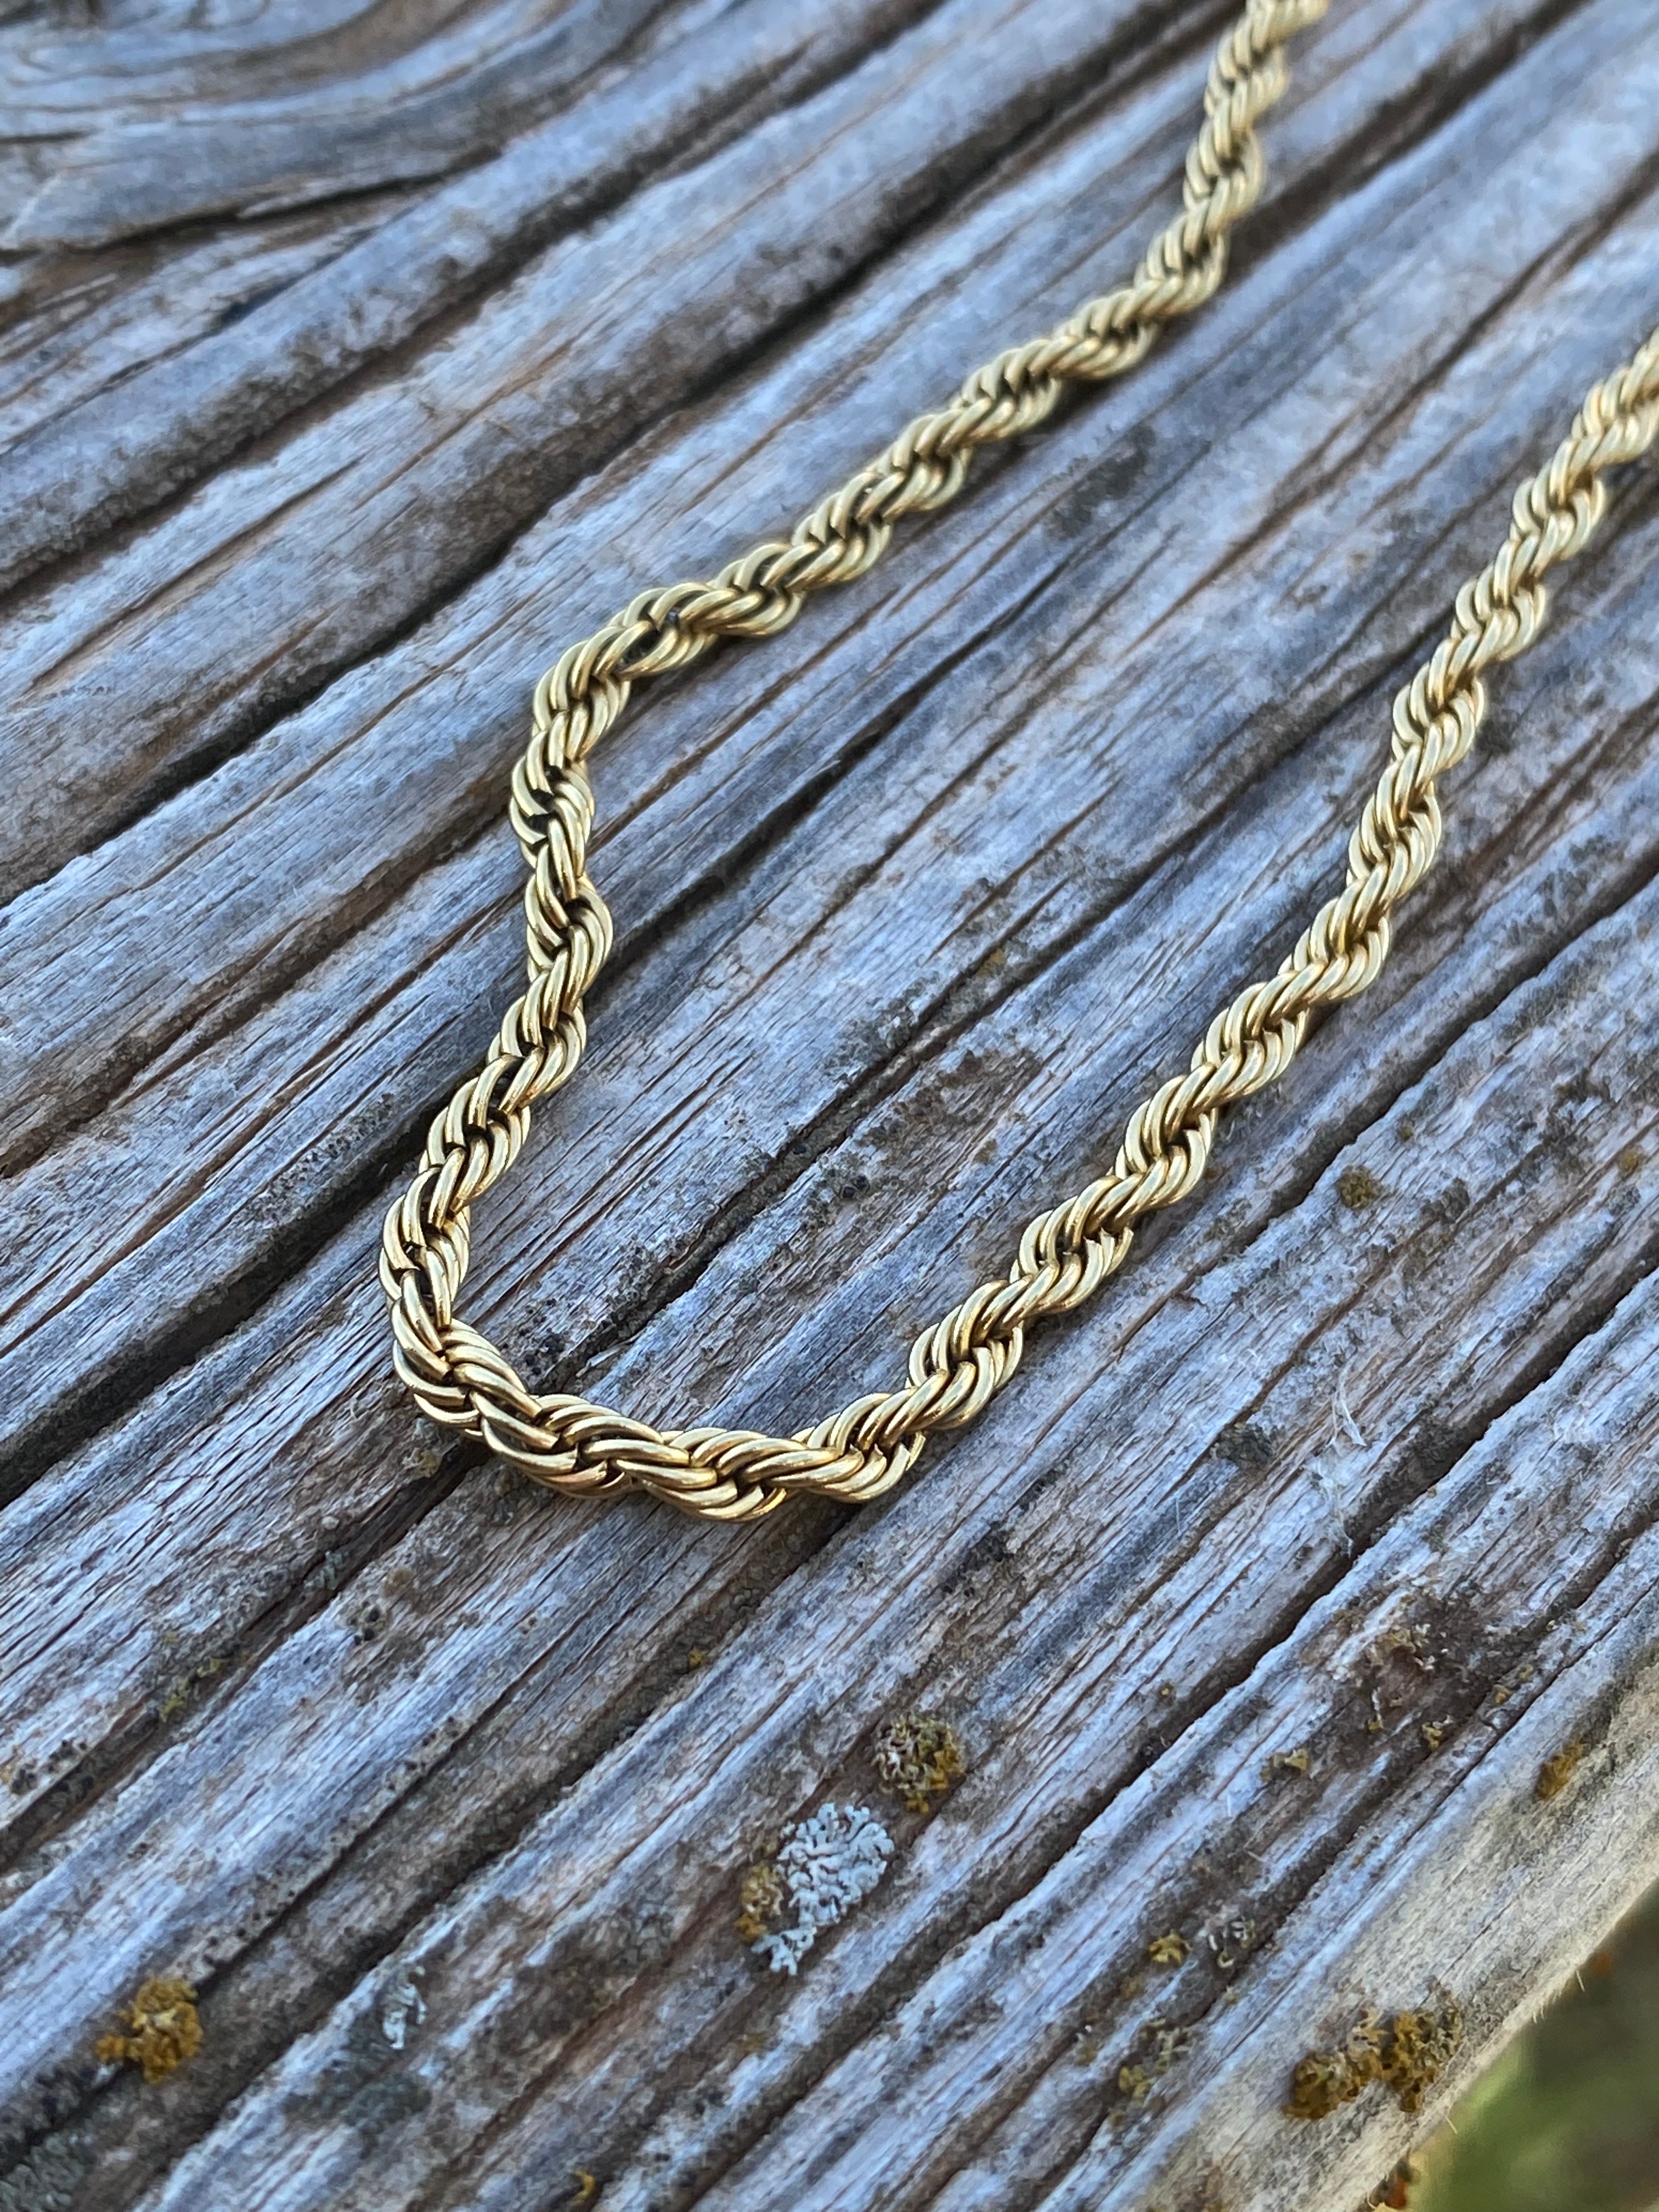 Gold Rope Chains – Southern Silver Company